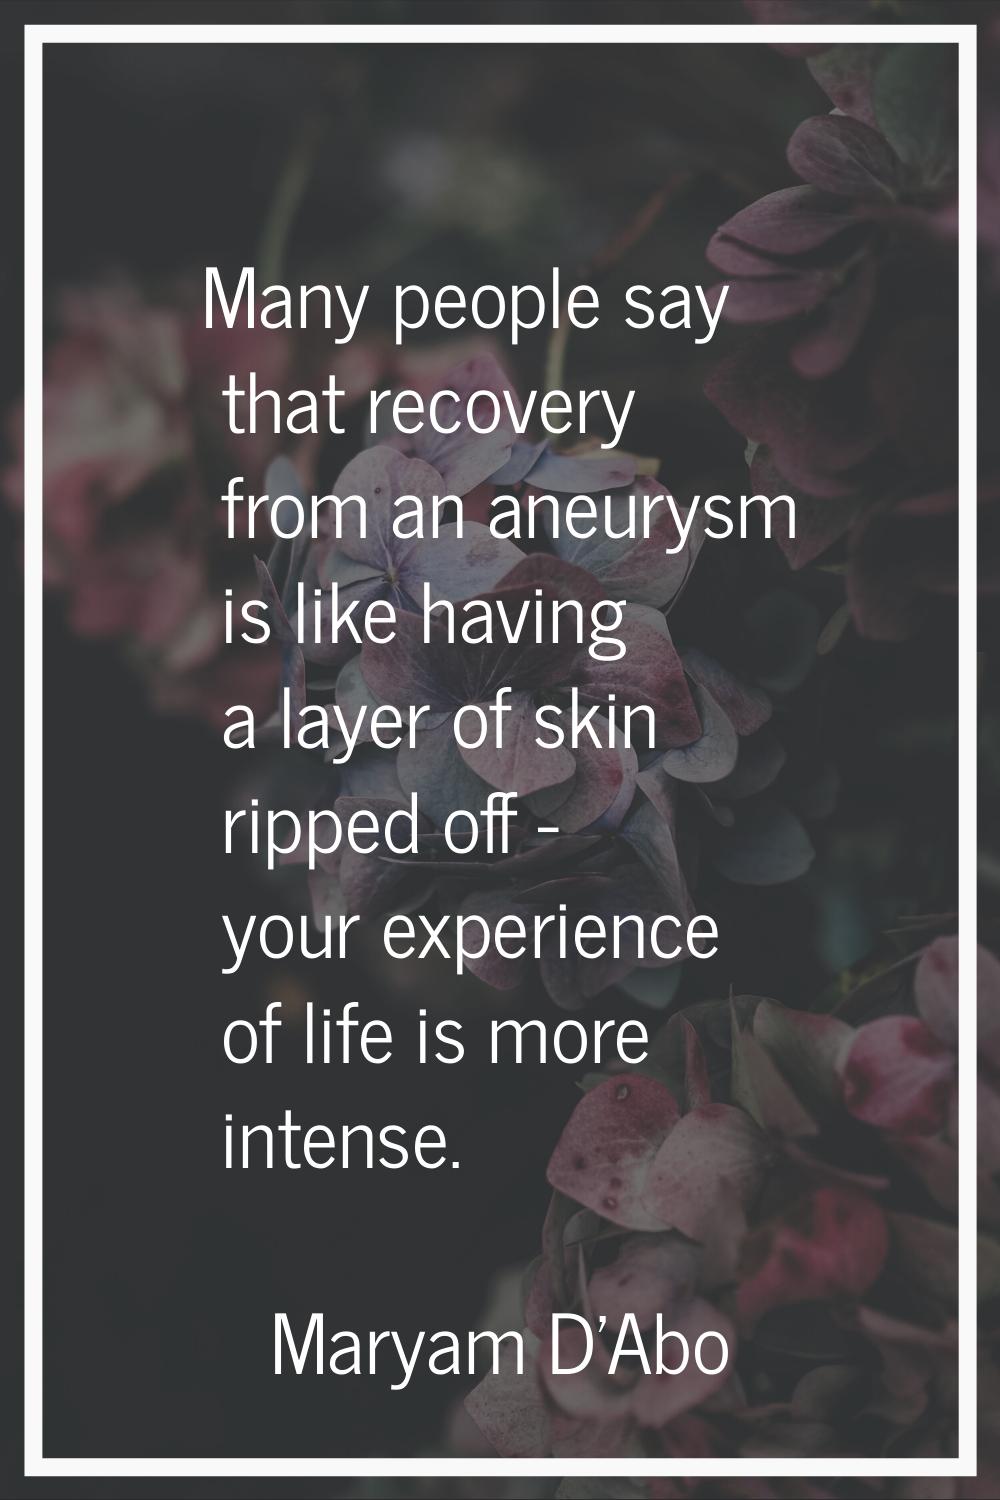 Many people say that recovery from an aneurysm is like having a layer of skin ripped off - your exp